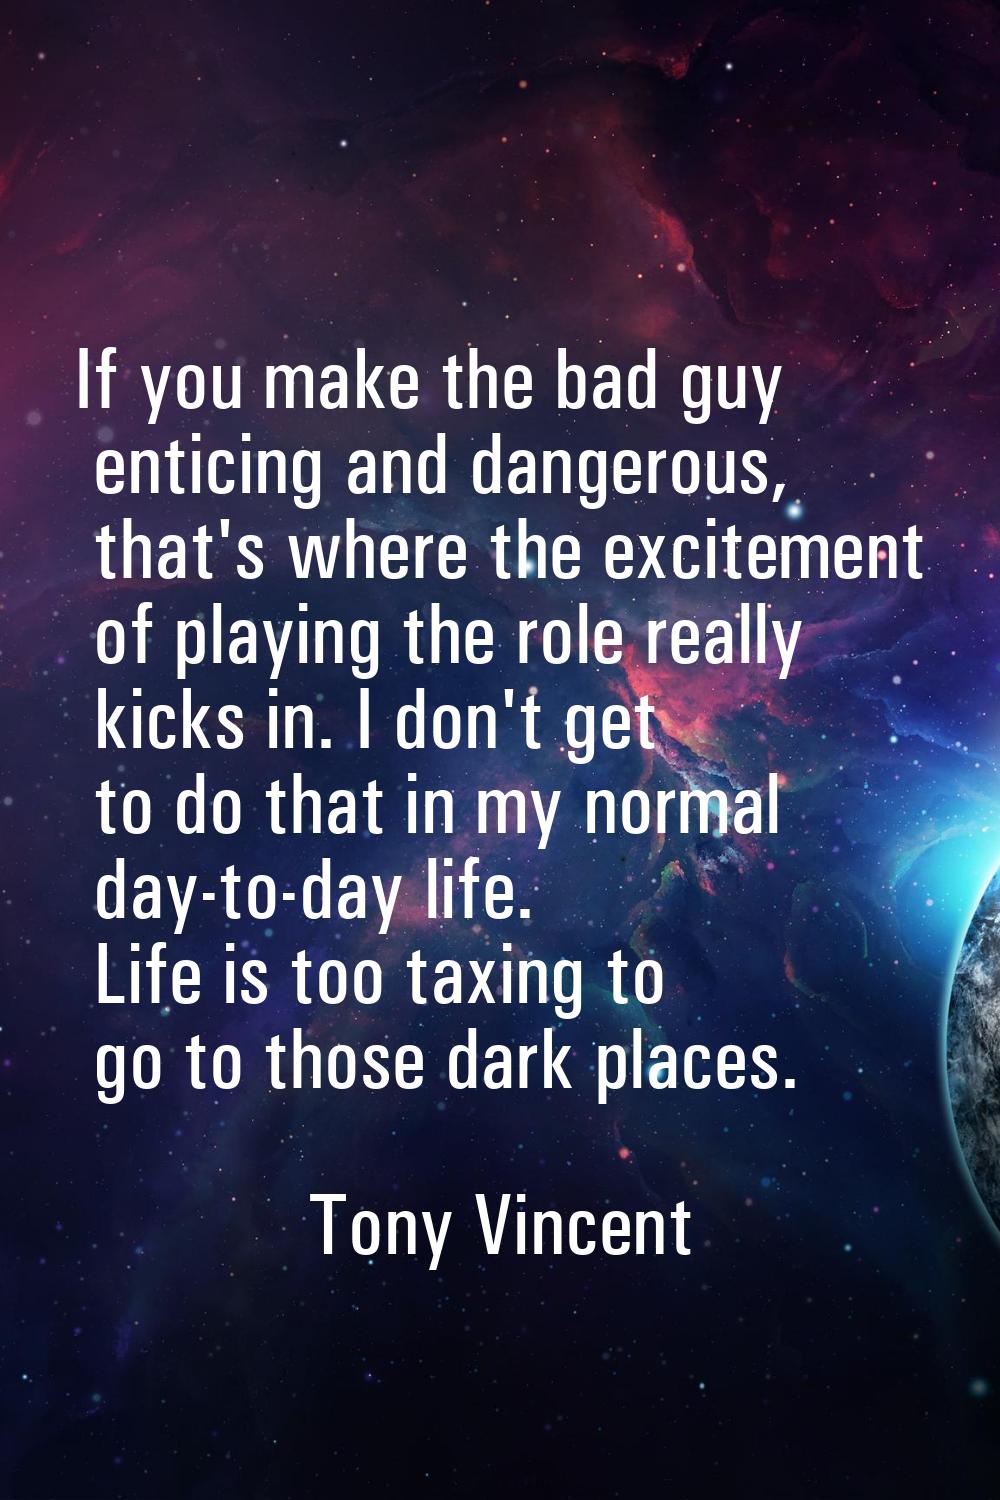 If you make the bad guy enticing and dangerous, that's where the excitement of playing the role rea